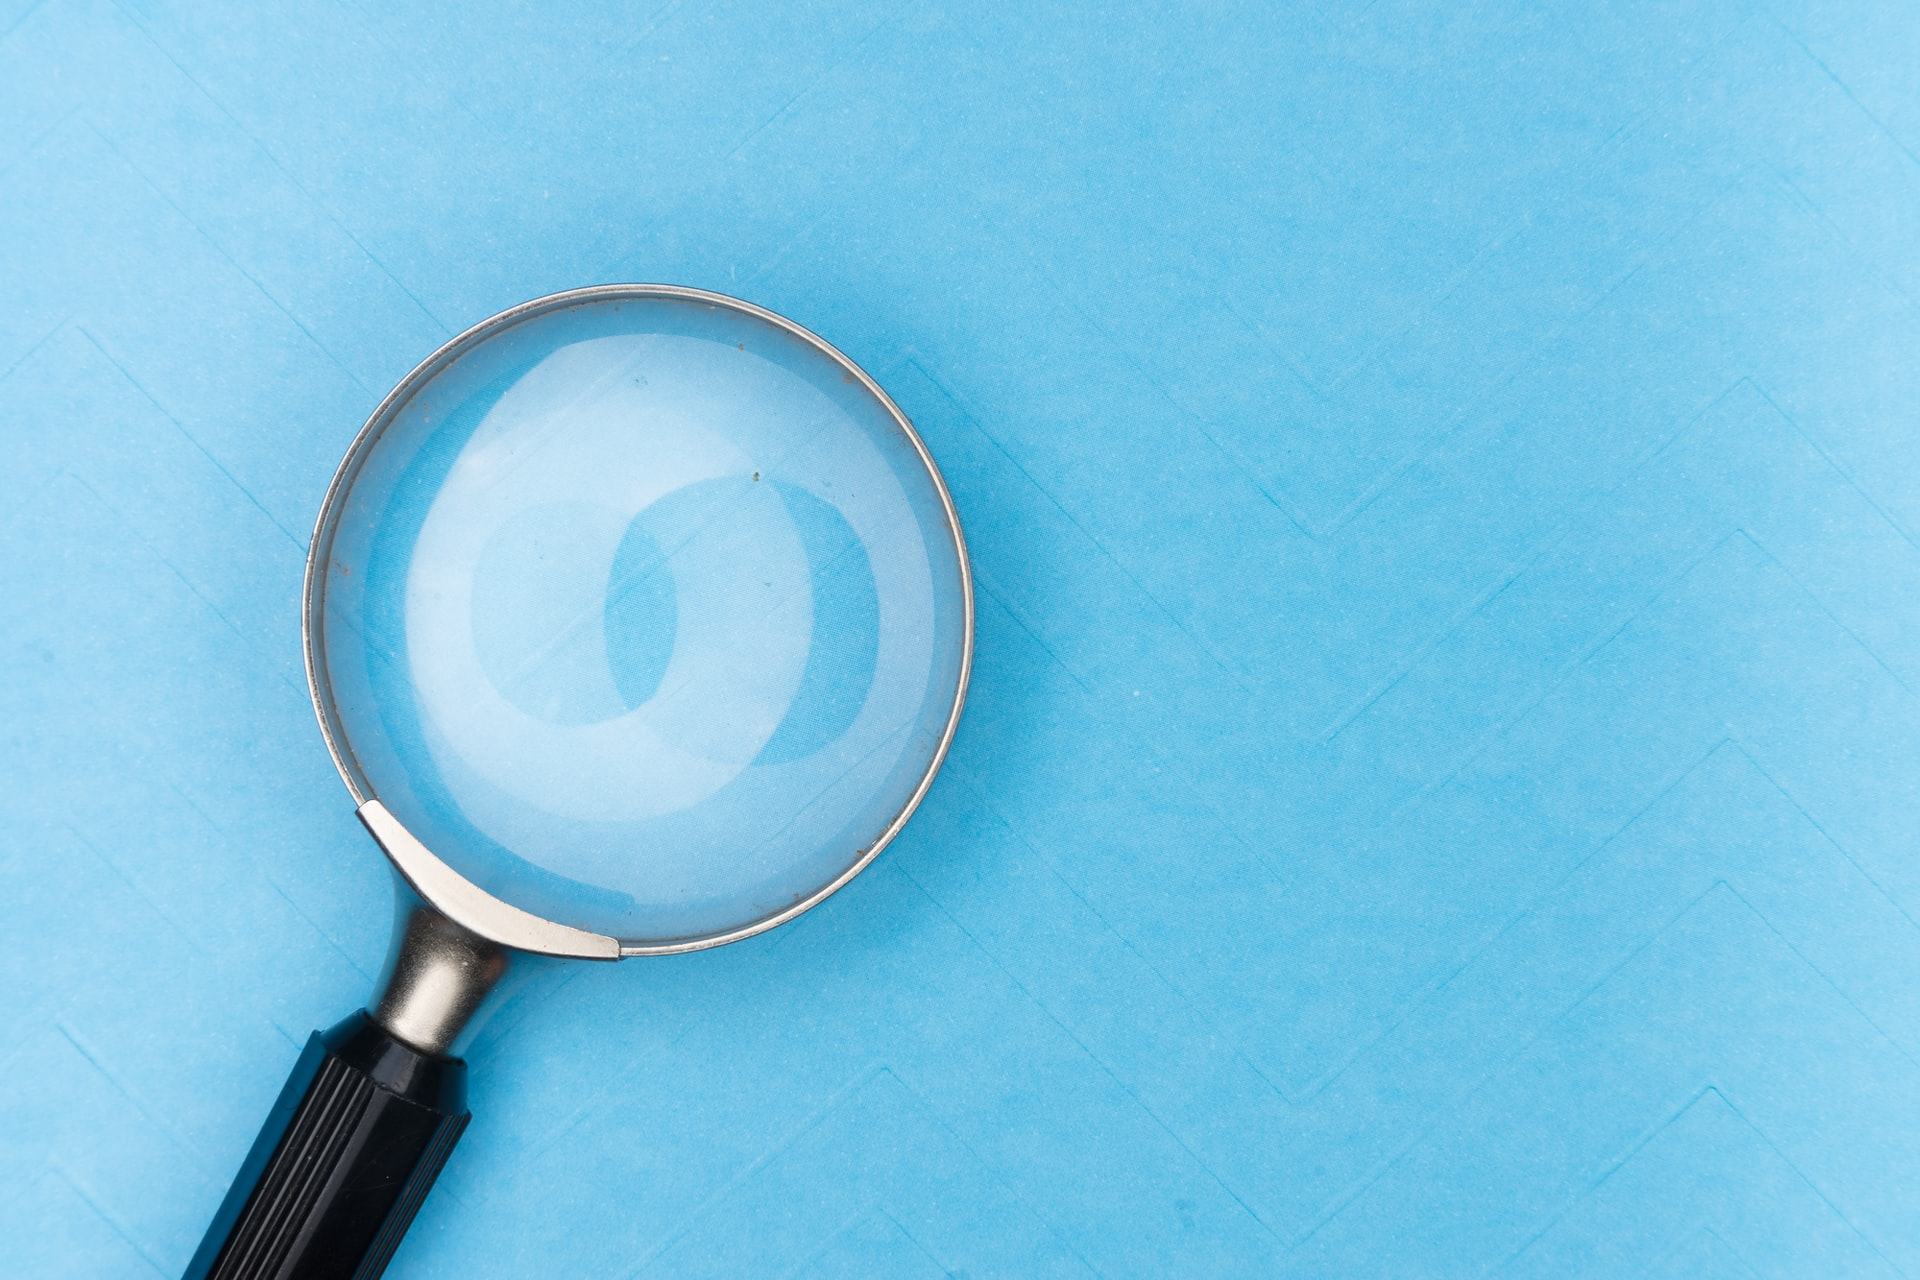 A magnifying glass on a plain blue background to symbolize the search bar on Google